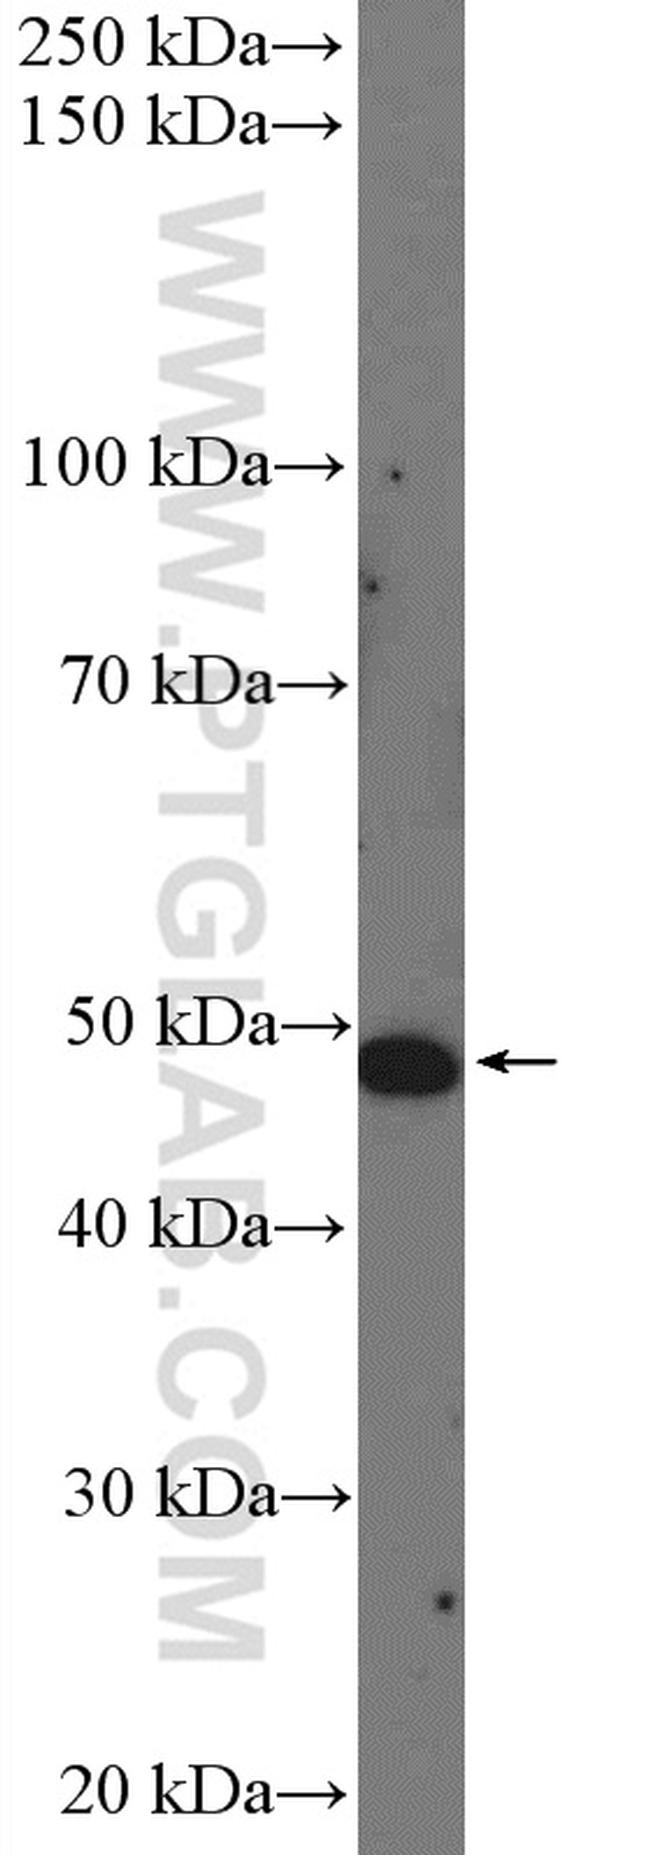 PDE7A Antibody in Western Blot (WB)